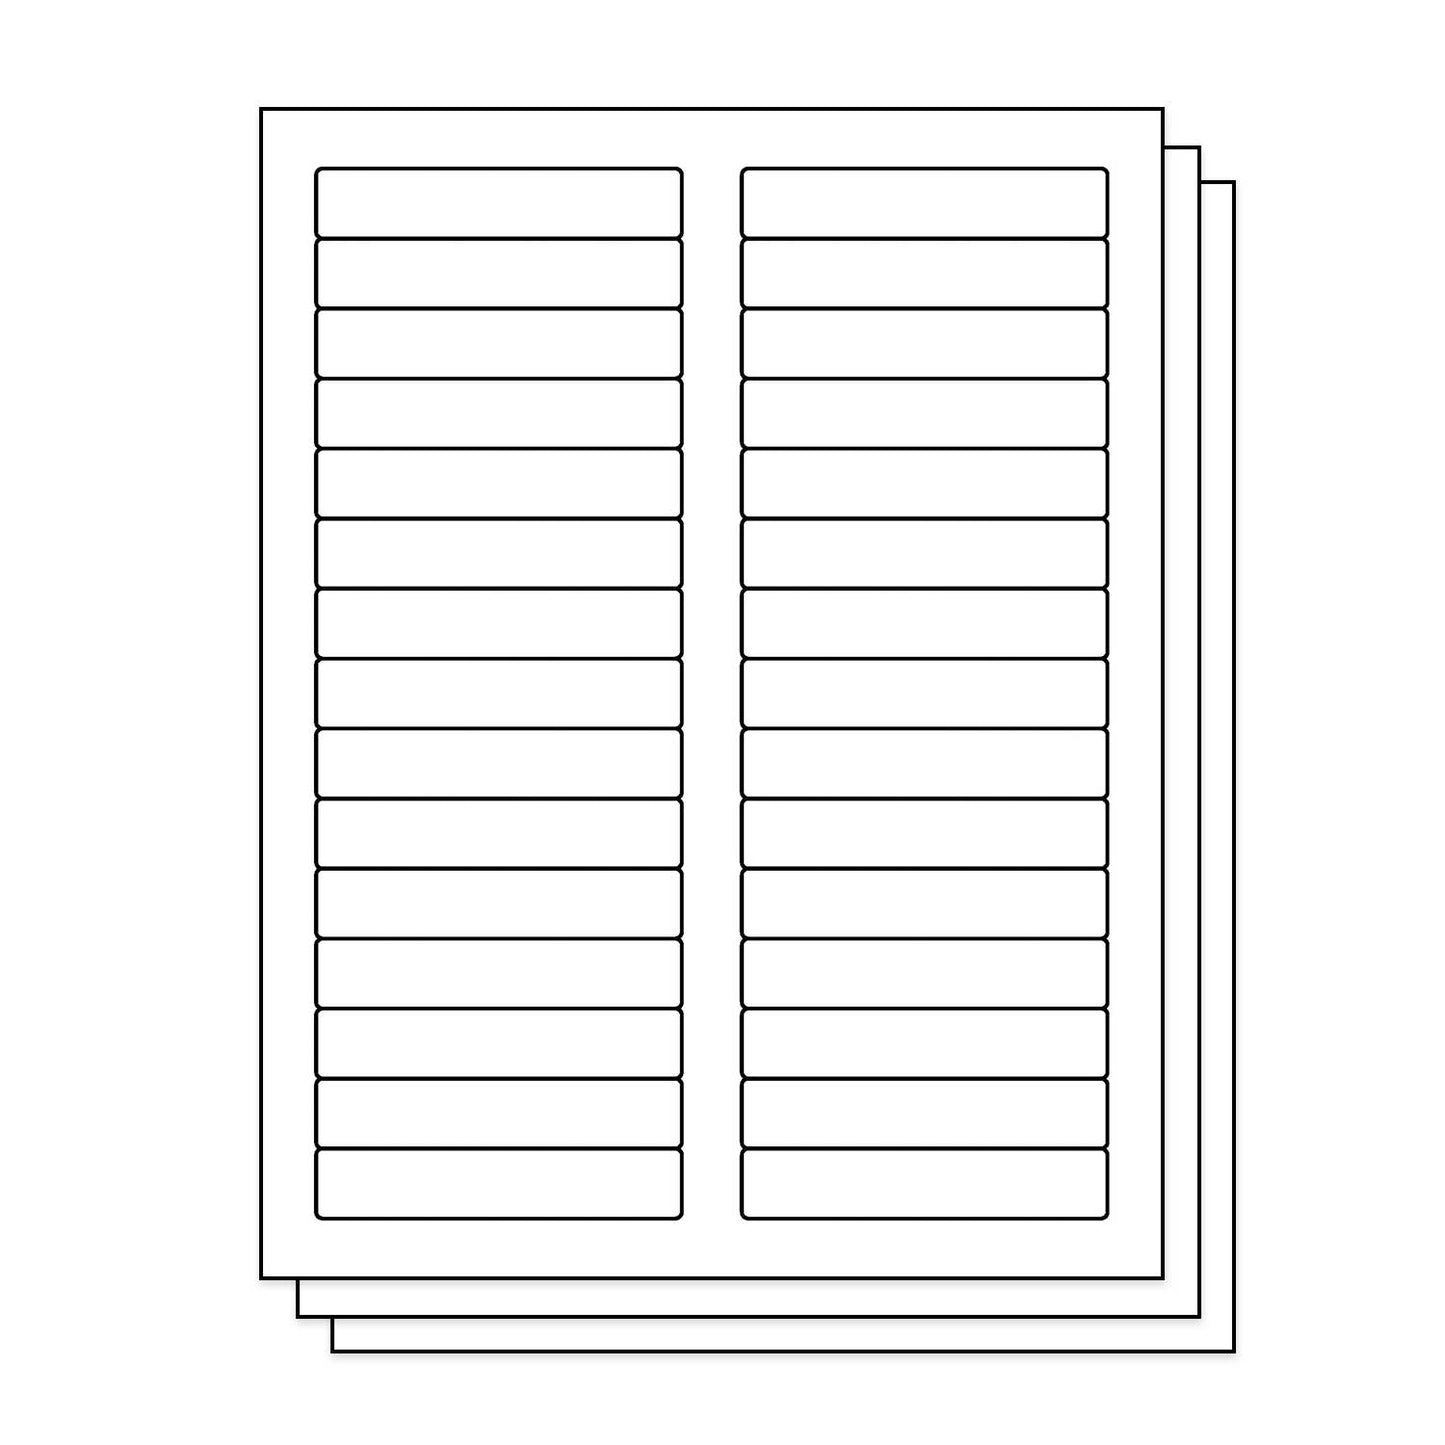 30UP | 3.4375 x 0.65625 inch Blank Rectangle Labels - 30 Labels per Sheet